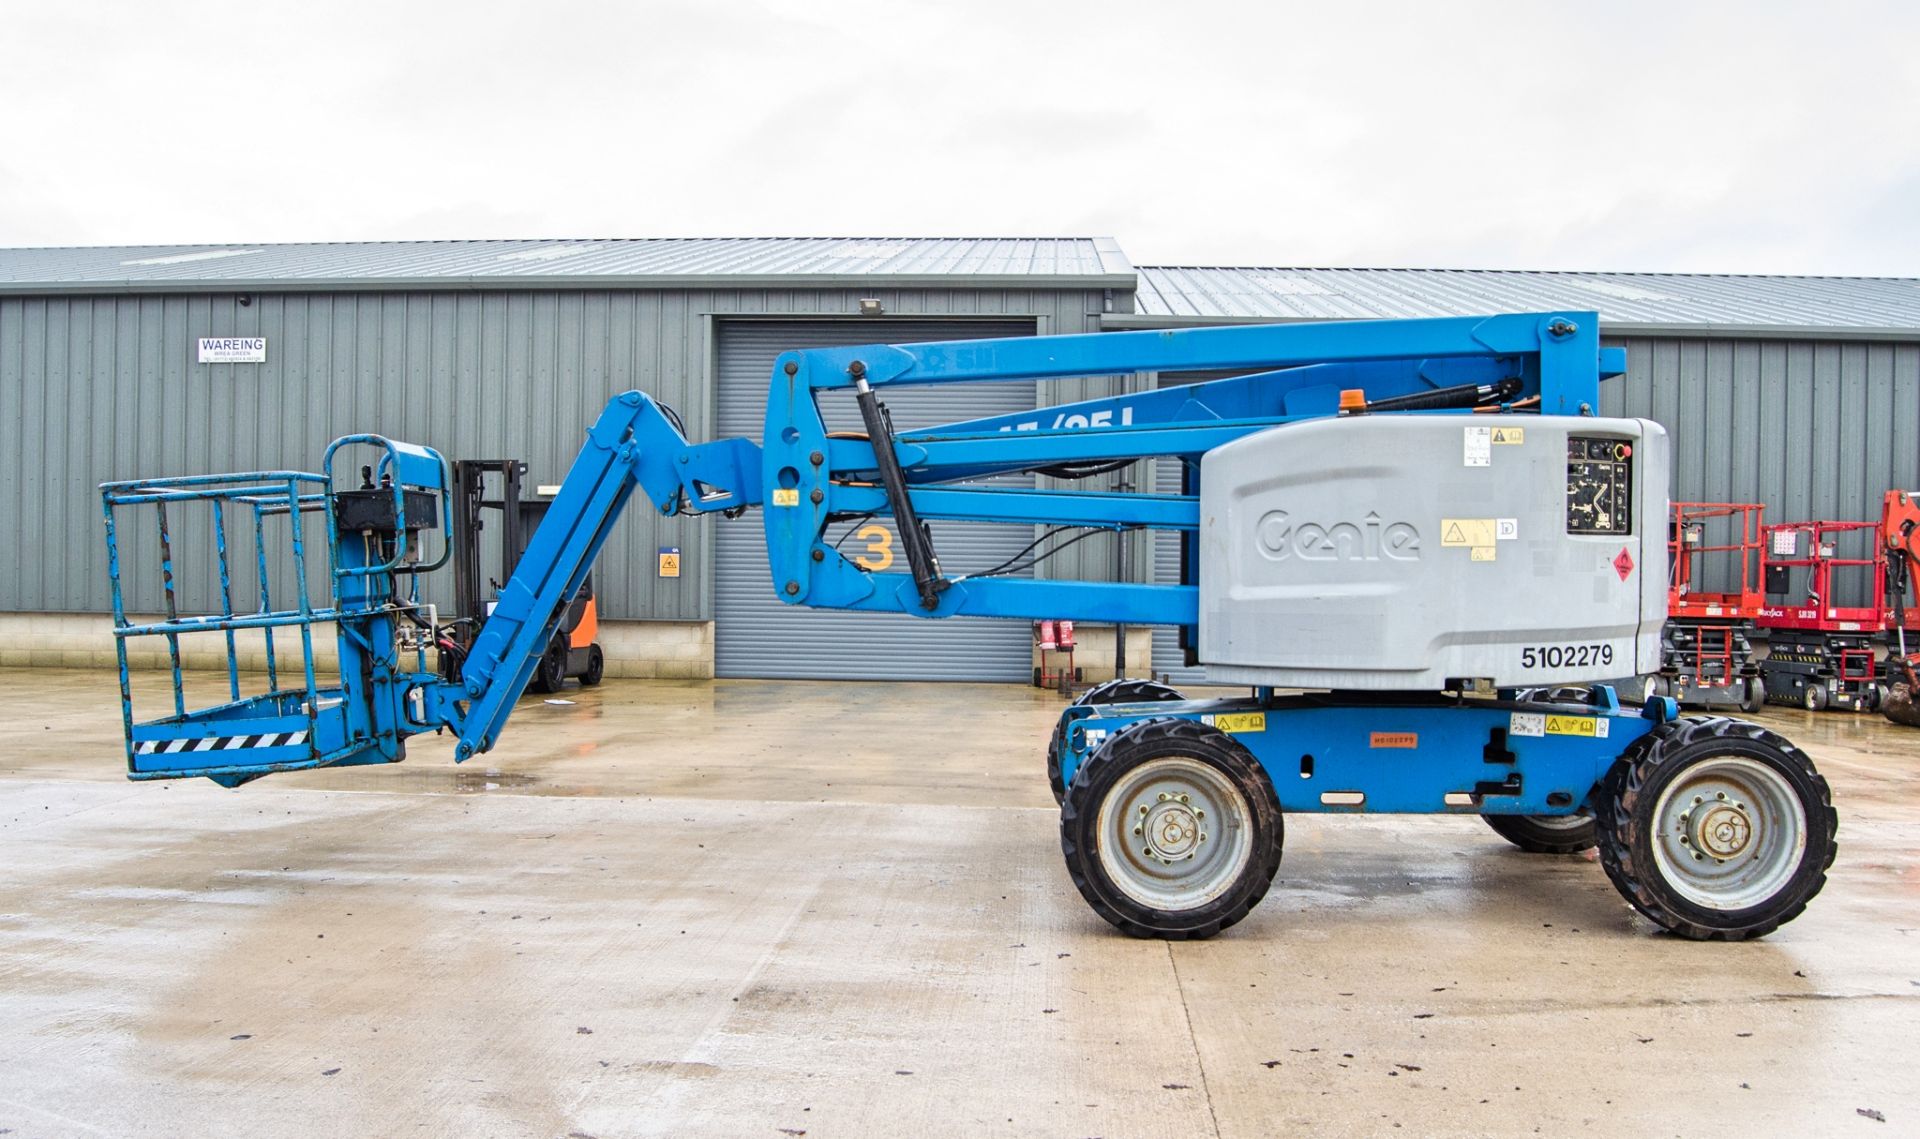 Genie Z45/25J diesel/battery electric 4 wheel drive articulated boom lift access platform Year: 2014 - Image 7 of 19